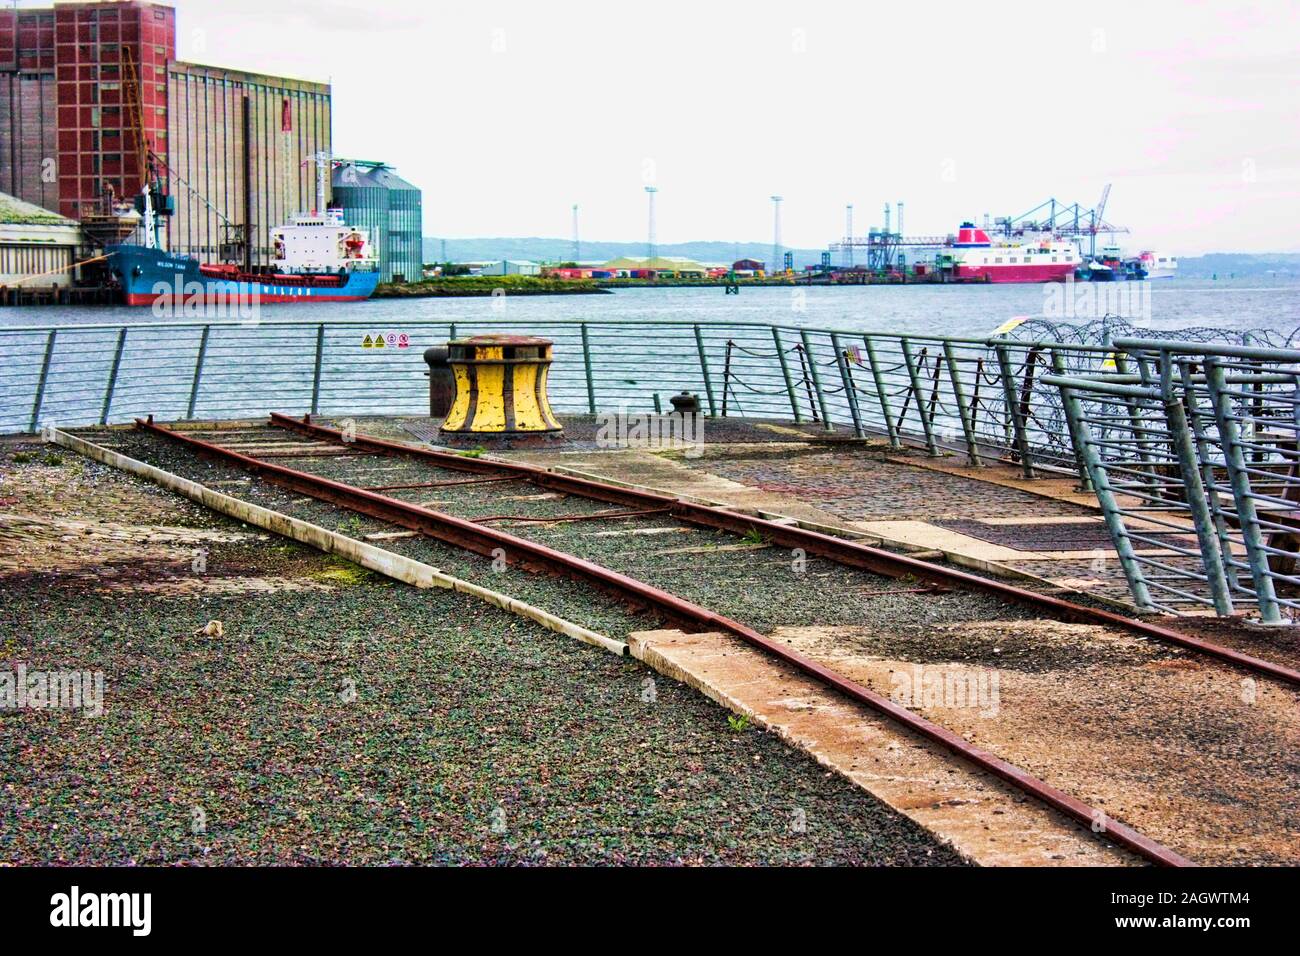 A view from the ground, at dock side, of the dry dock in Belfast in Northern Ireland.  The dry dock once housed the World famous Titanic ship.  The ra Stock Photo